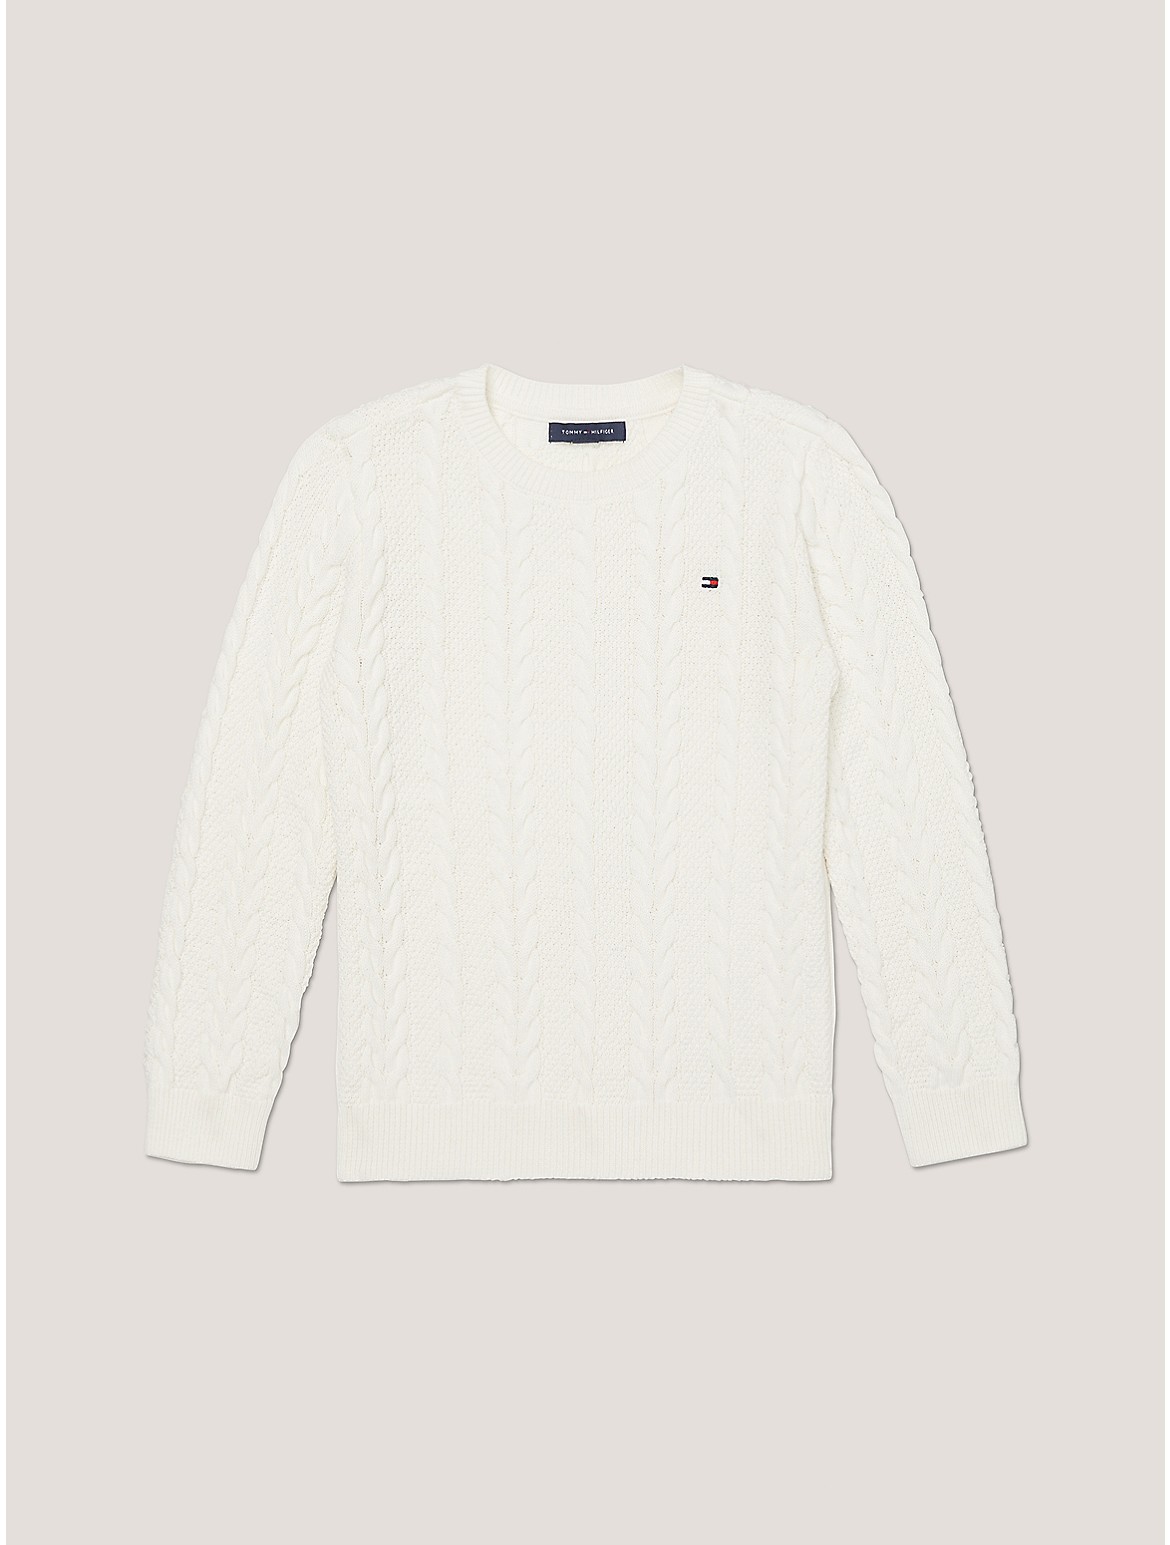 Tommy Hilfiger Boys' Kids' Cable Knit Sweater - White - XS